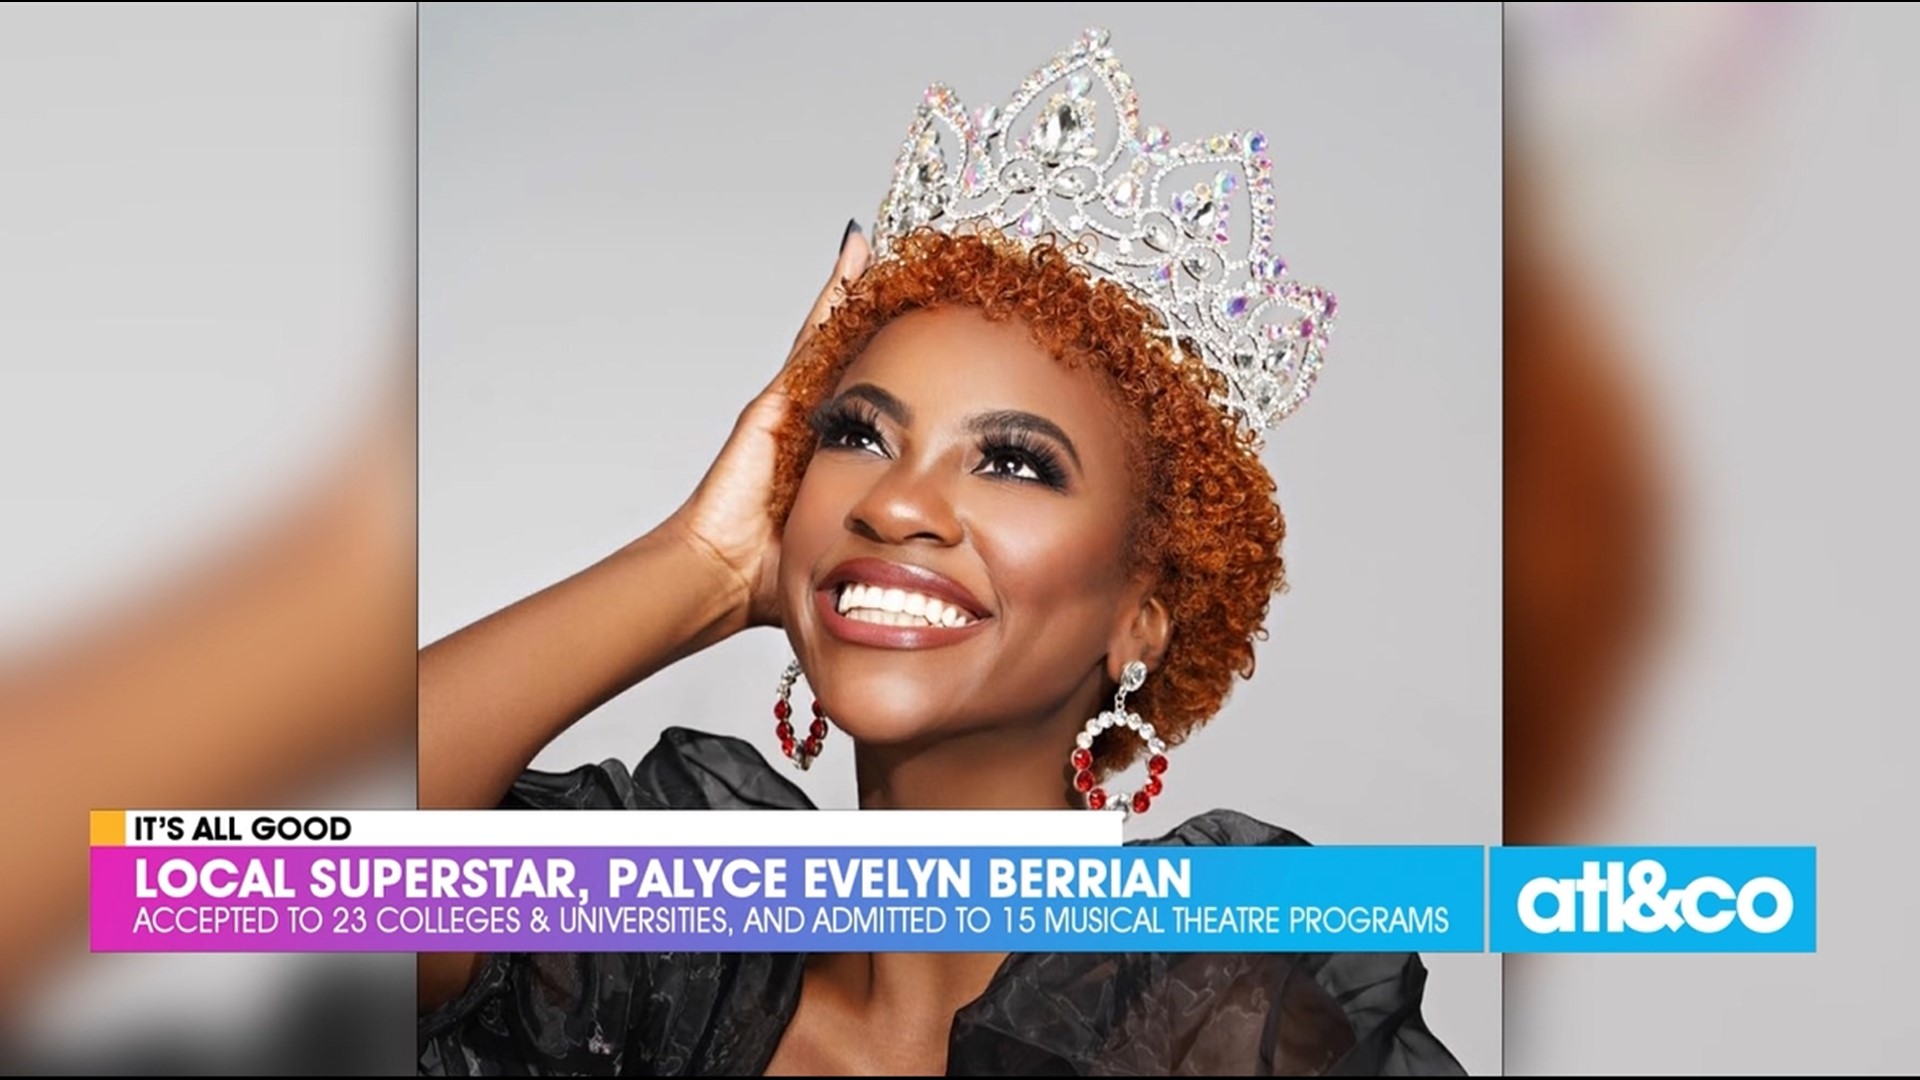 An American Teen superstar! Pebblebrook High's Palyce Evelyn Berrian has been accepted to 23 colleges and universities and 15 musical theatre programs.